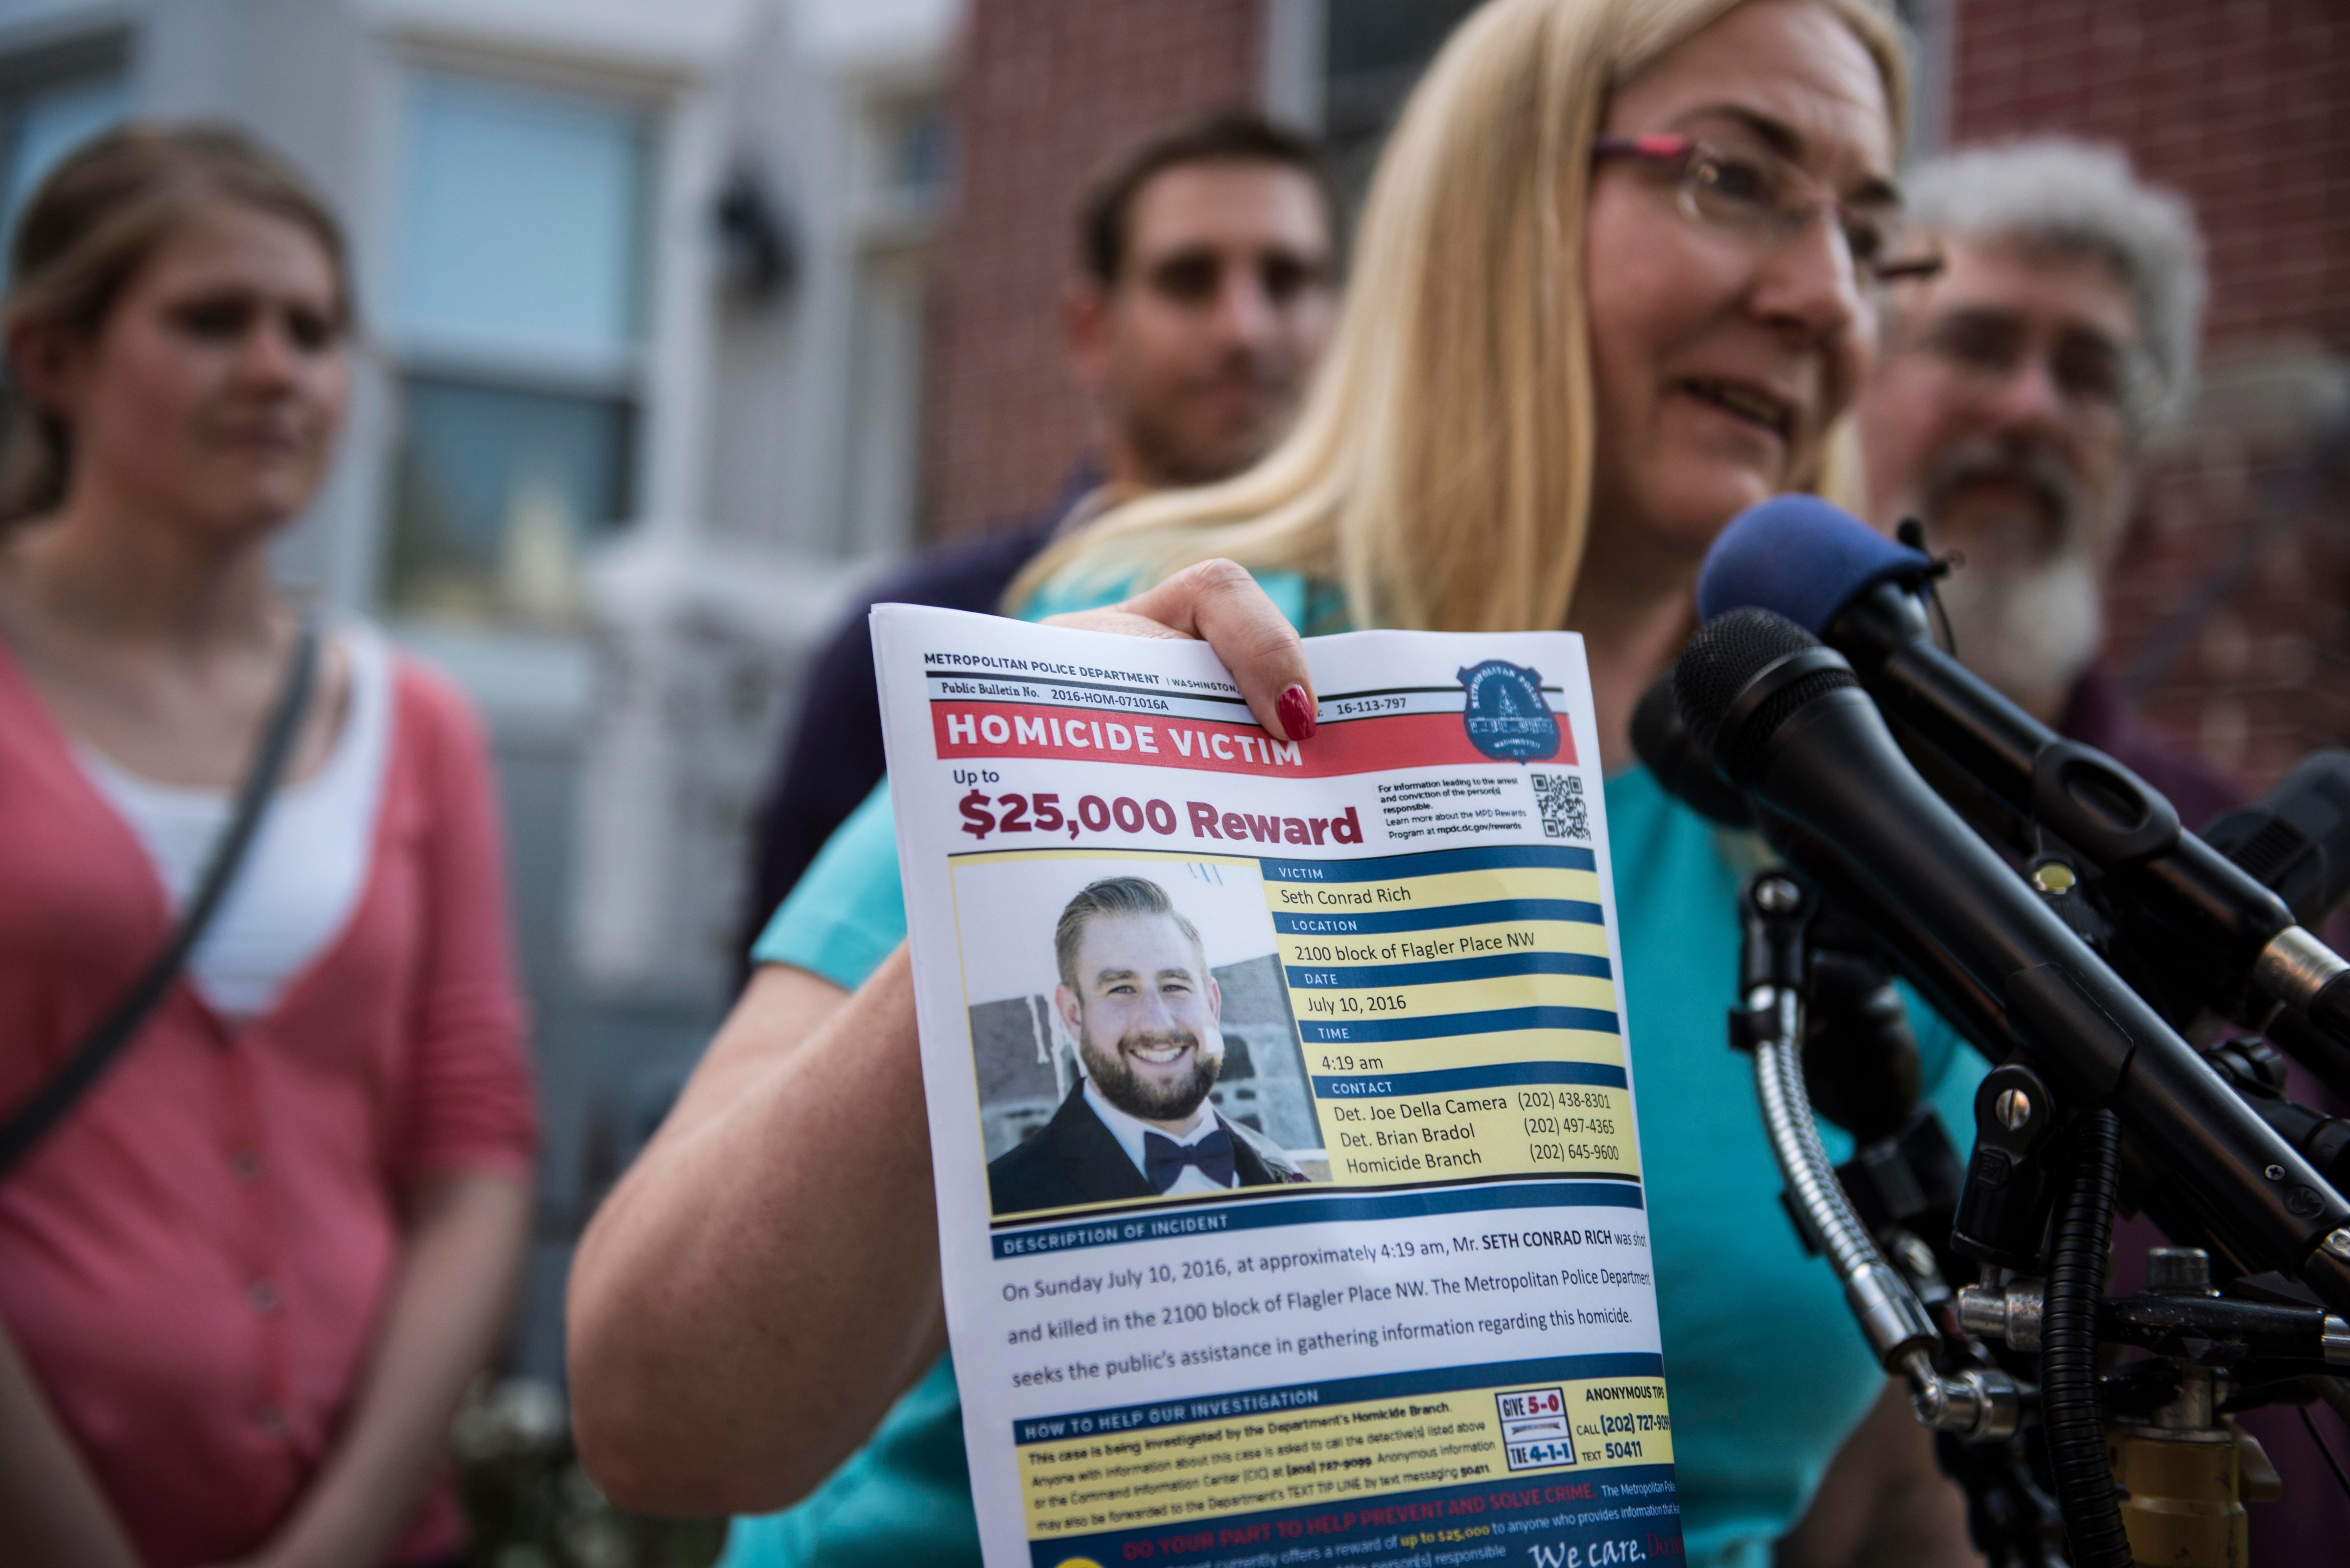 Mary Rich, the mother of slain DNC staffer Seth Rich, gives a press conference in Bloomingdale on August 1, 2016. Seth Rich was gunned down in the DC neighborhood a month ago and the Rich's were imploring people for any information they may have about his killer. (Michael Robinson Chavez—The Washington Post/Getty Images)